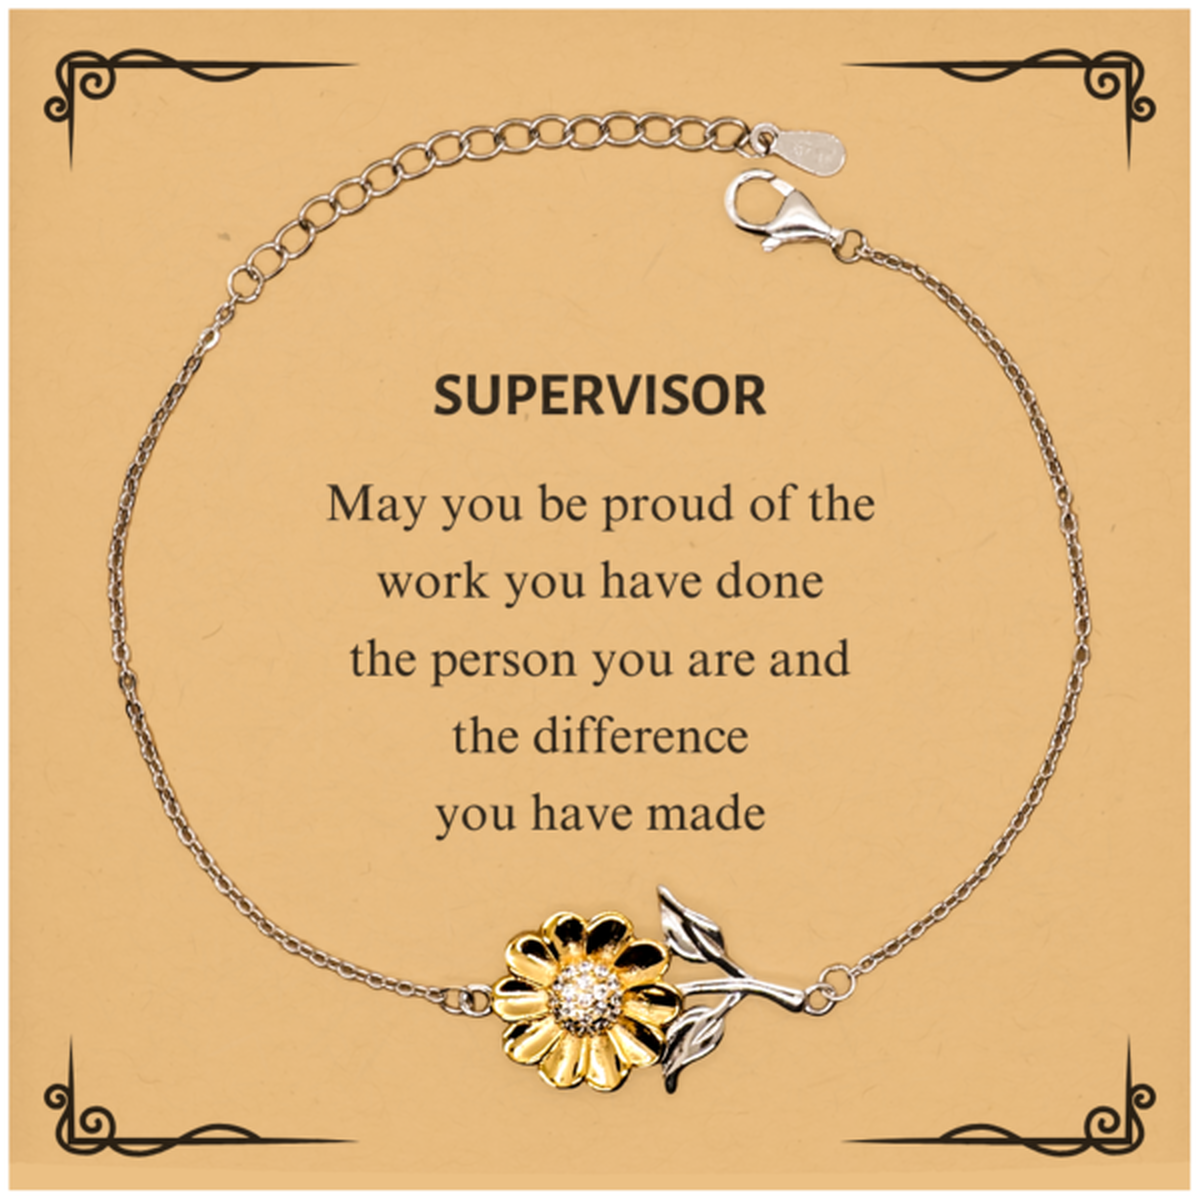 Supervisor May you be proud of the work you have done, Retirement Supervisor Sunflower Bracelet for Colleague Appreciation Gifts Amazing for Supervisor